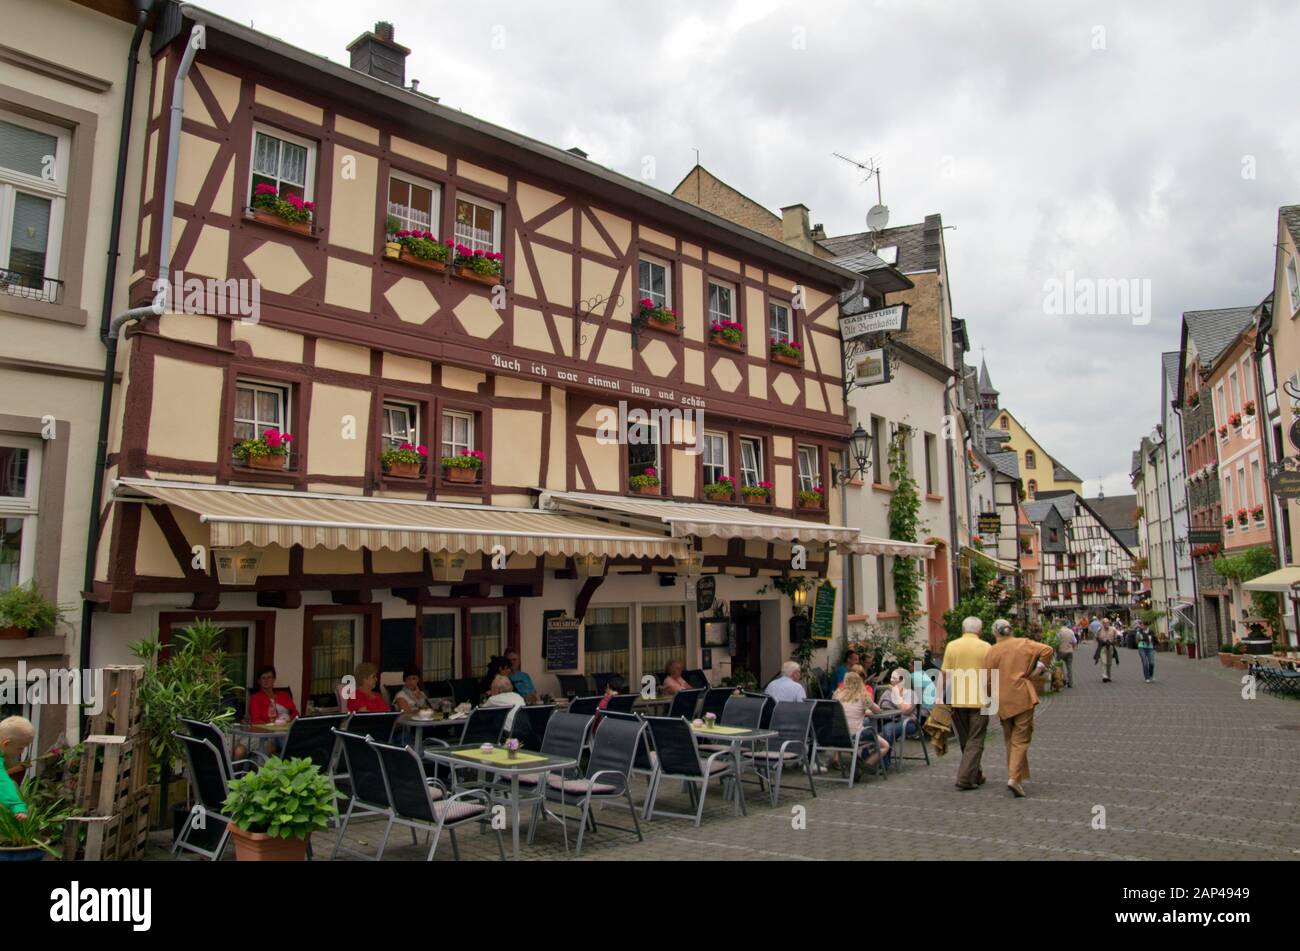 Piesport, timber framed buildings Stock Photo